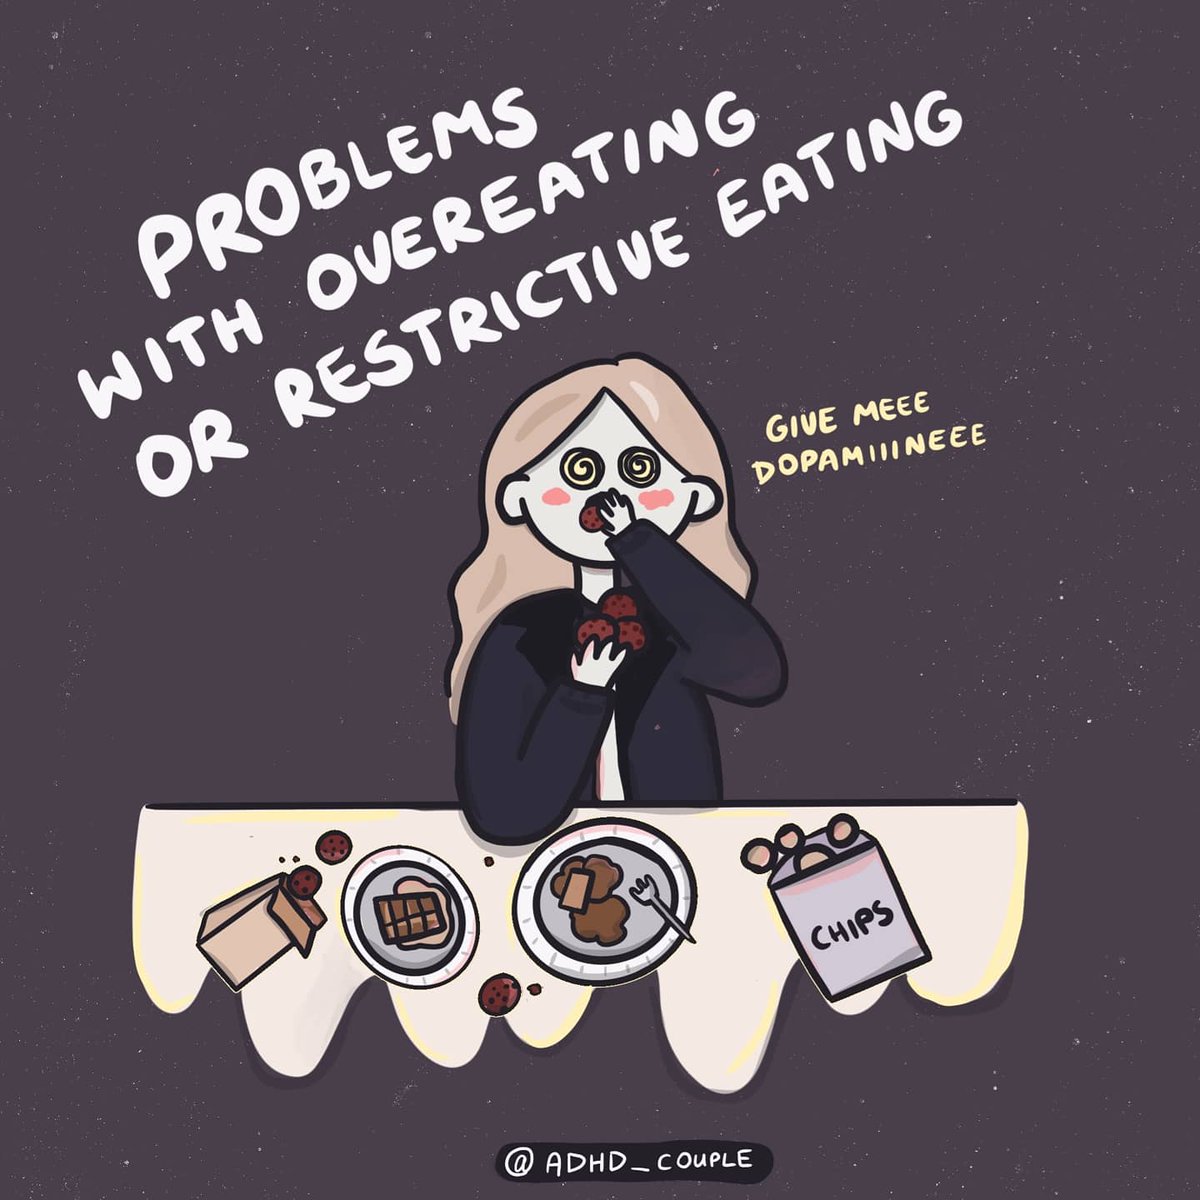 Disordered eating